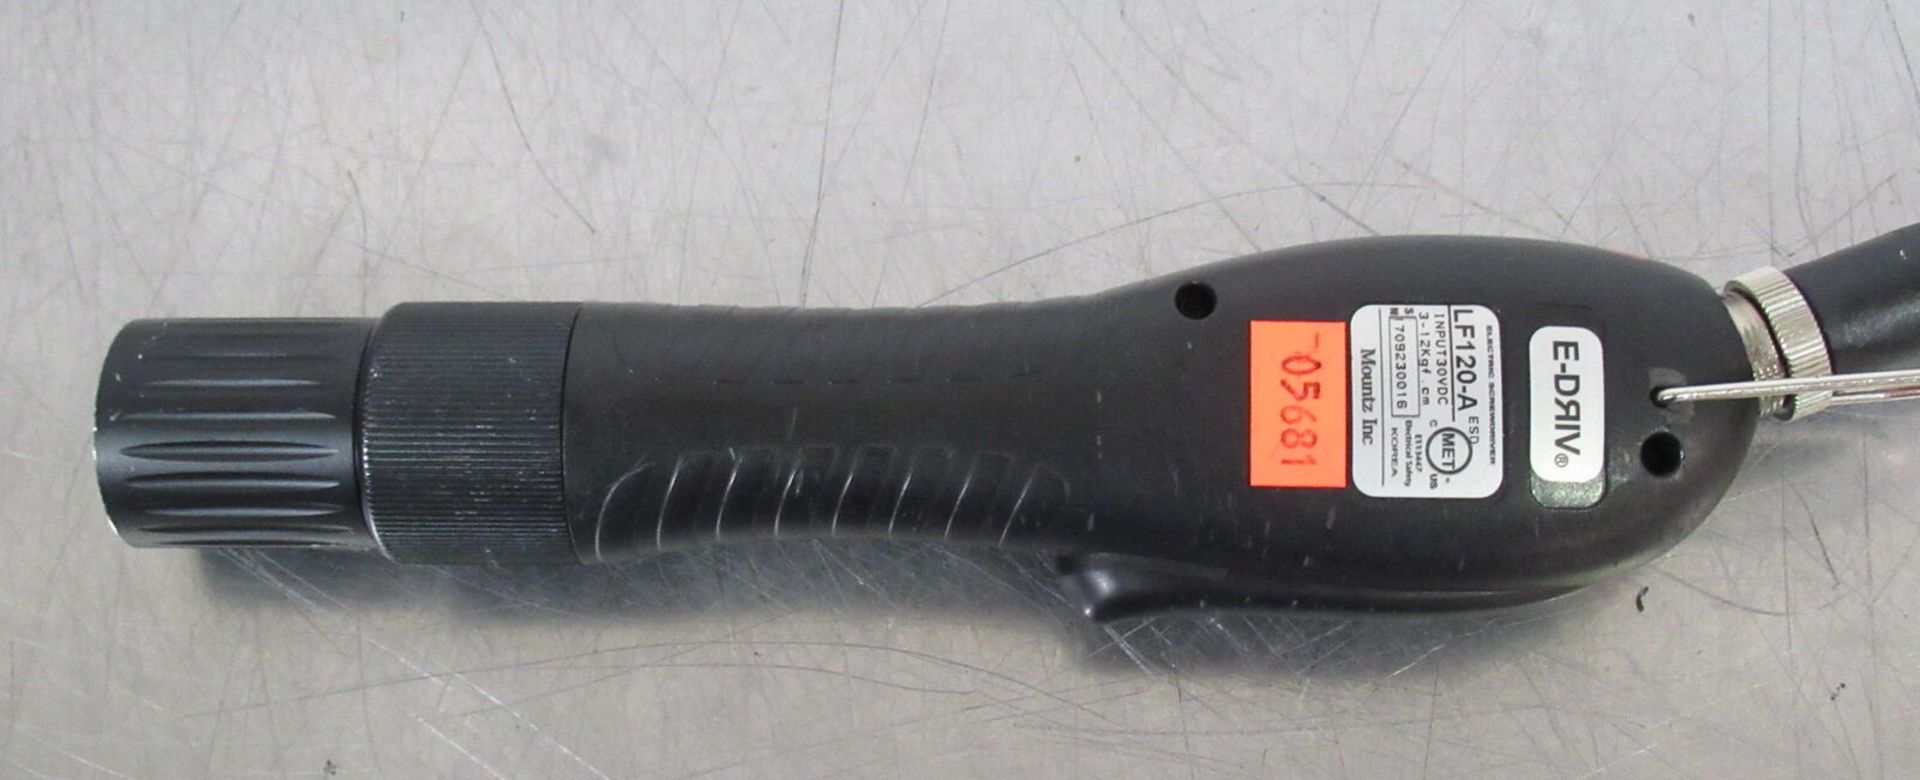 Mountz LF120-A ESD Electric Screwdriver w/ STC-40 Controller - Image 3 of 7